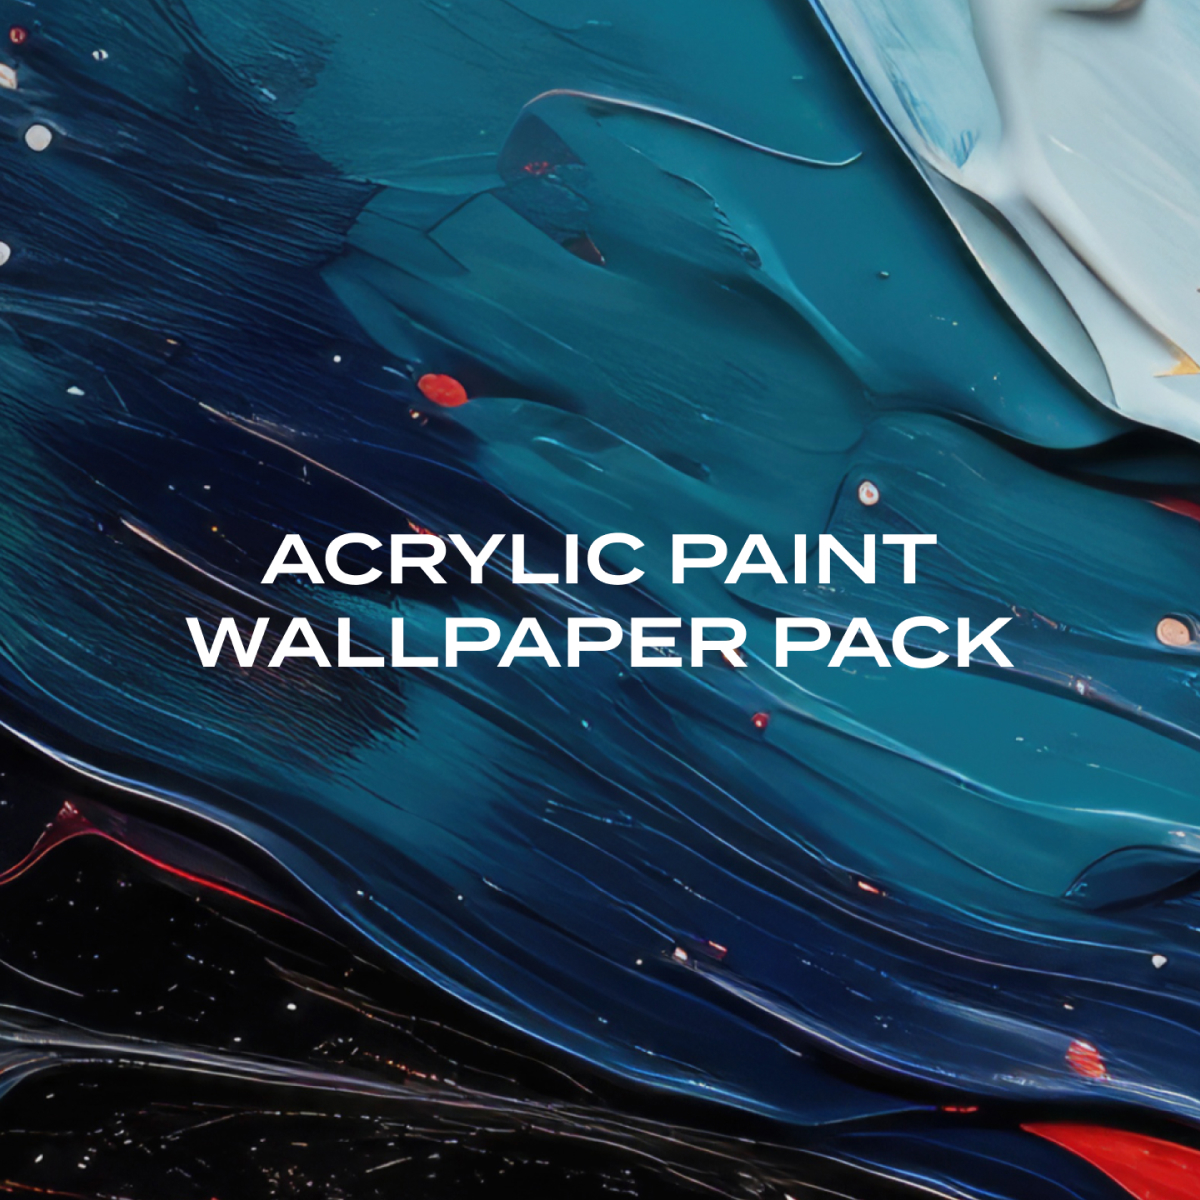 Acrylic Paint Wallpaper Pack